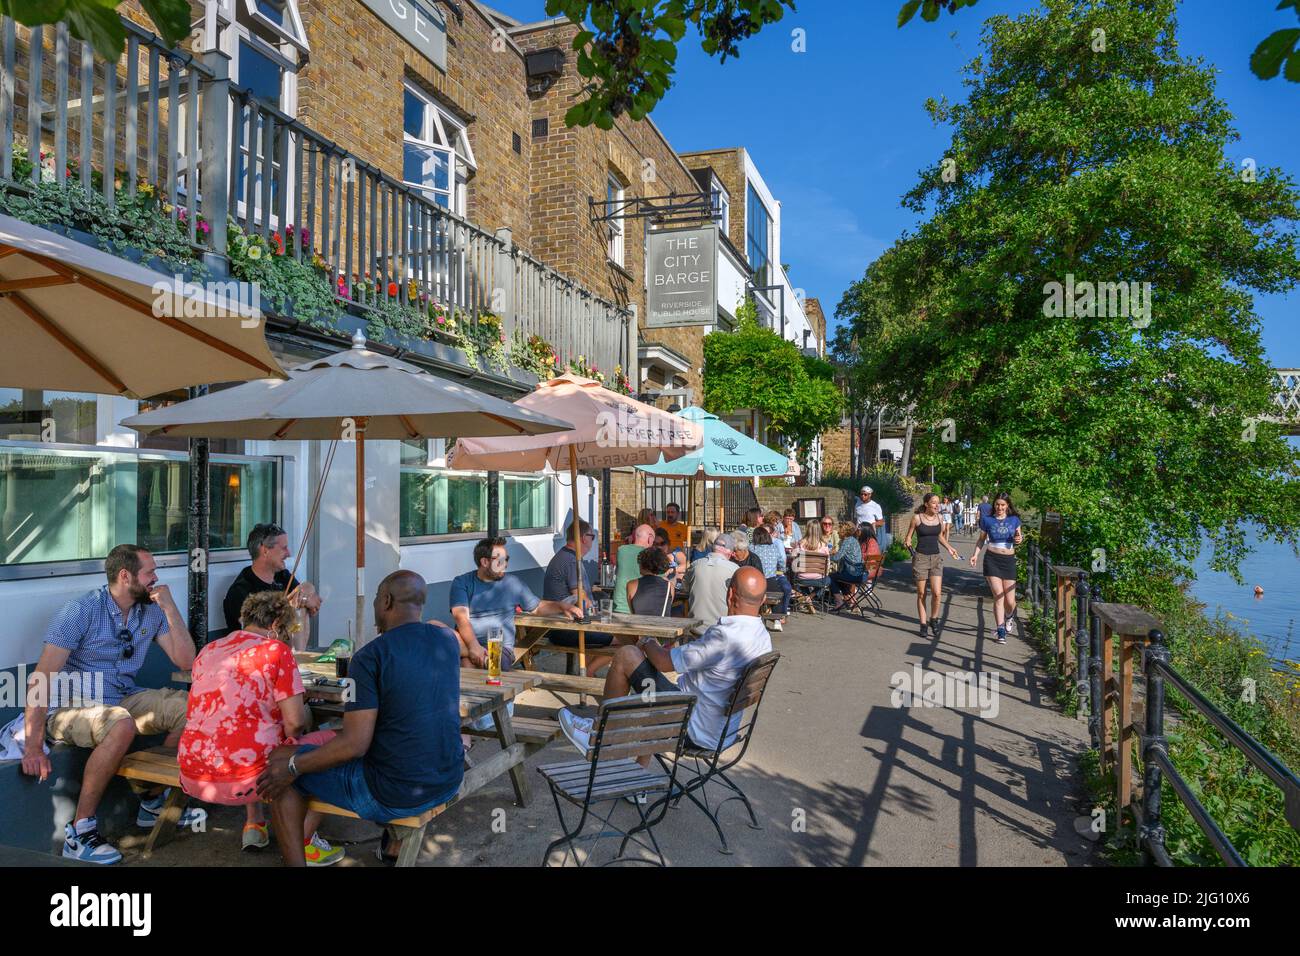 The City Barge pub on the River Thames at Chiswick, London, England, UK Stock Photo